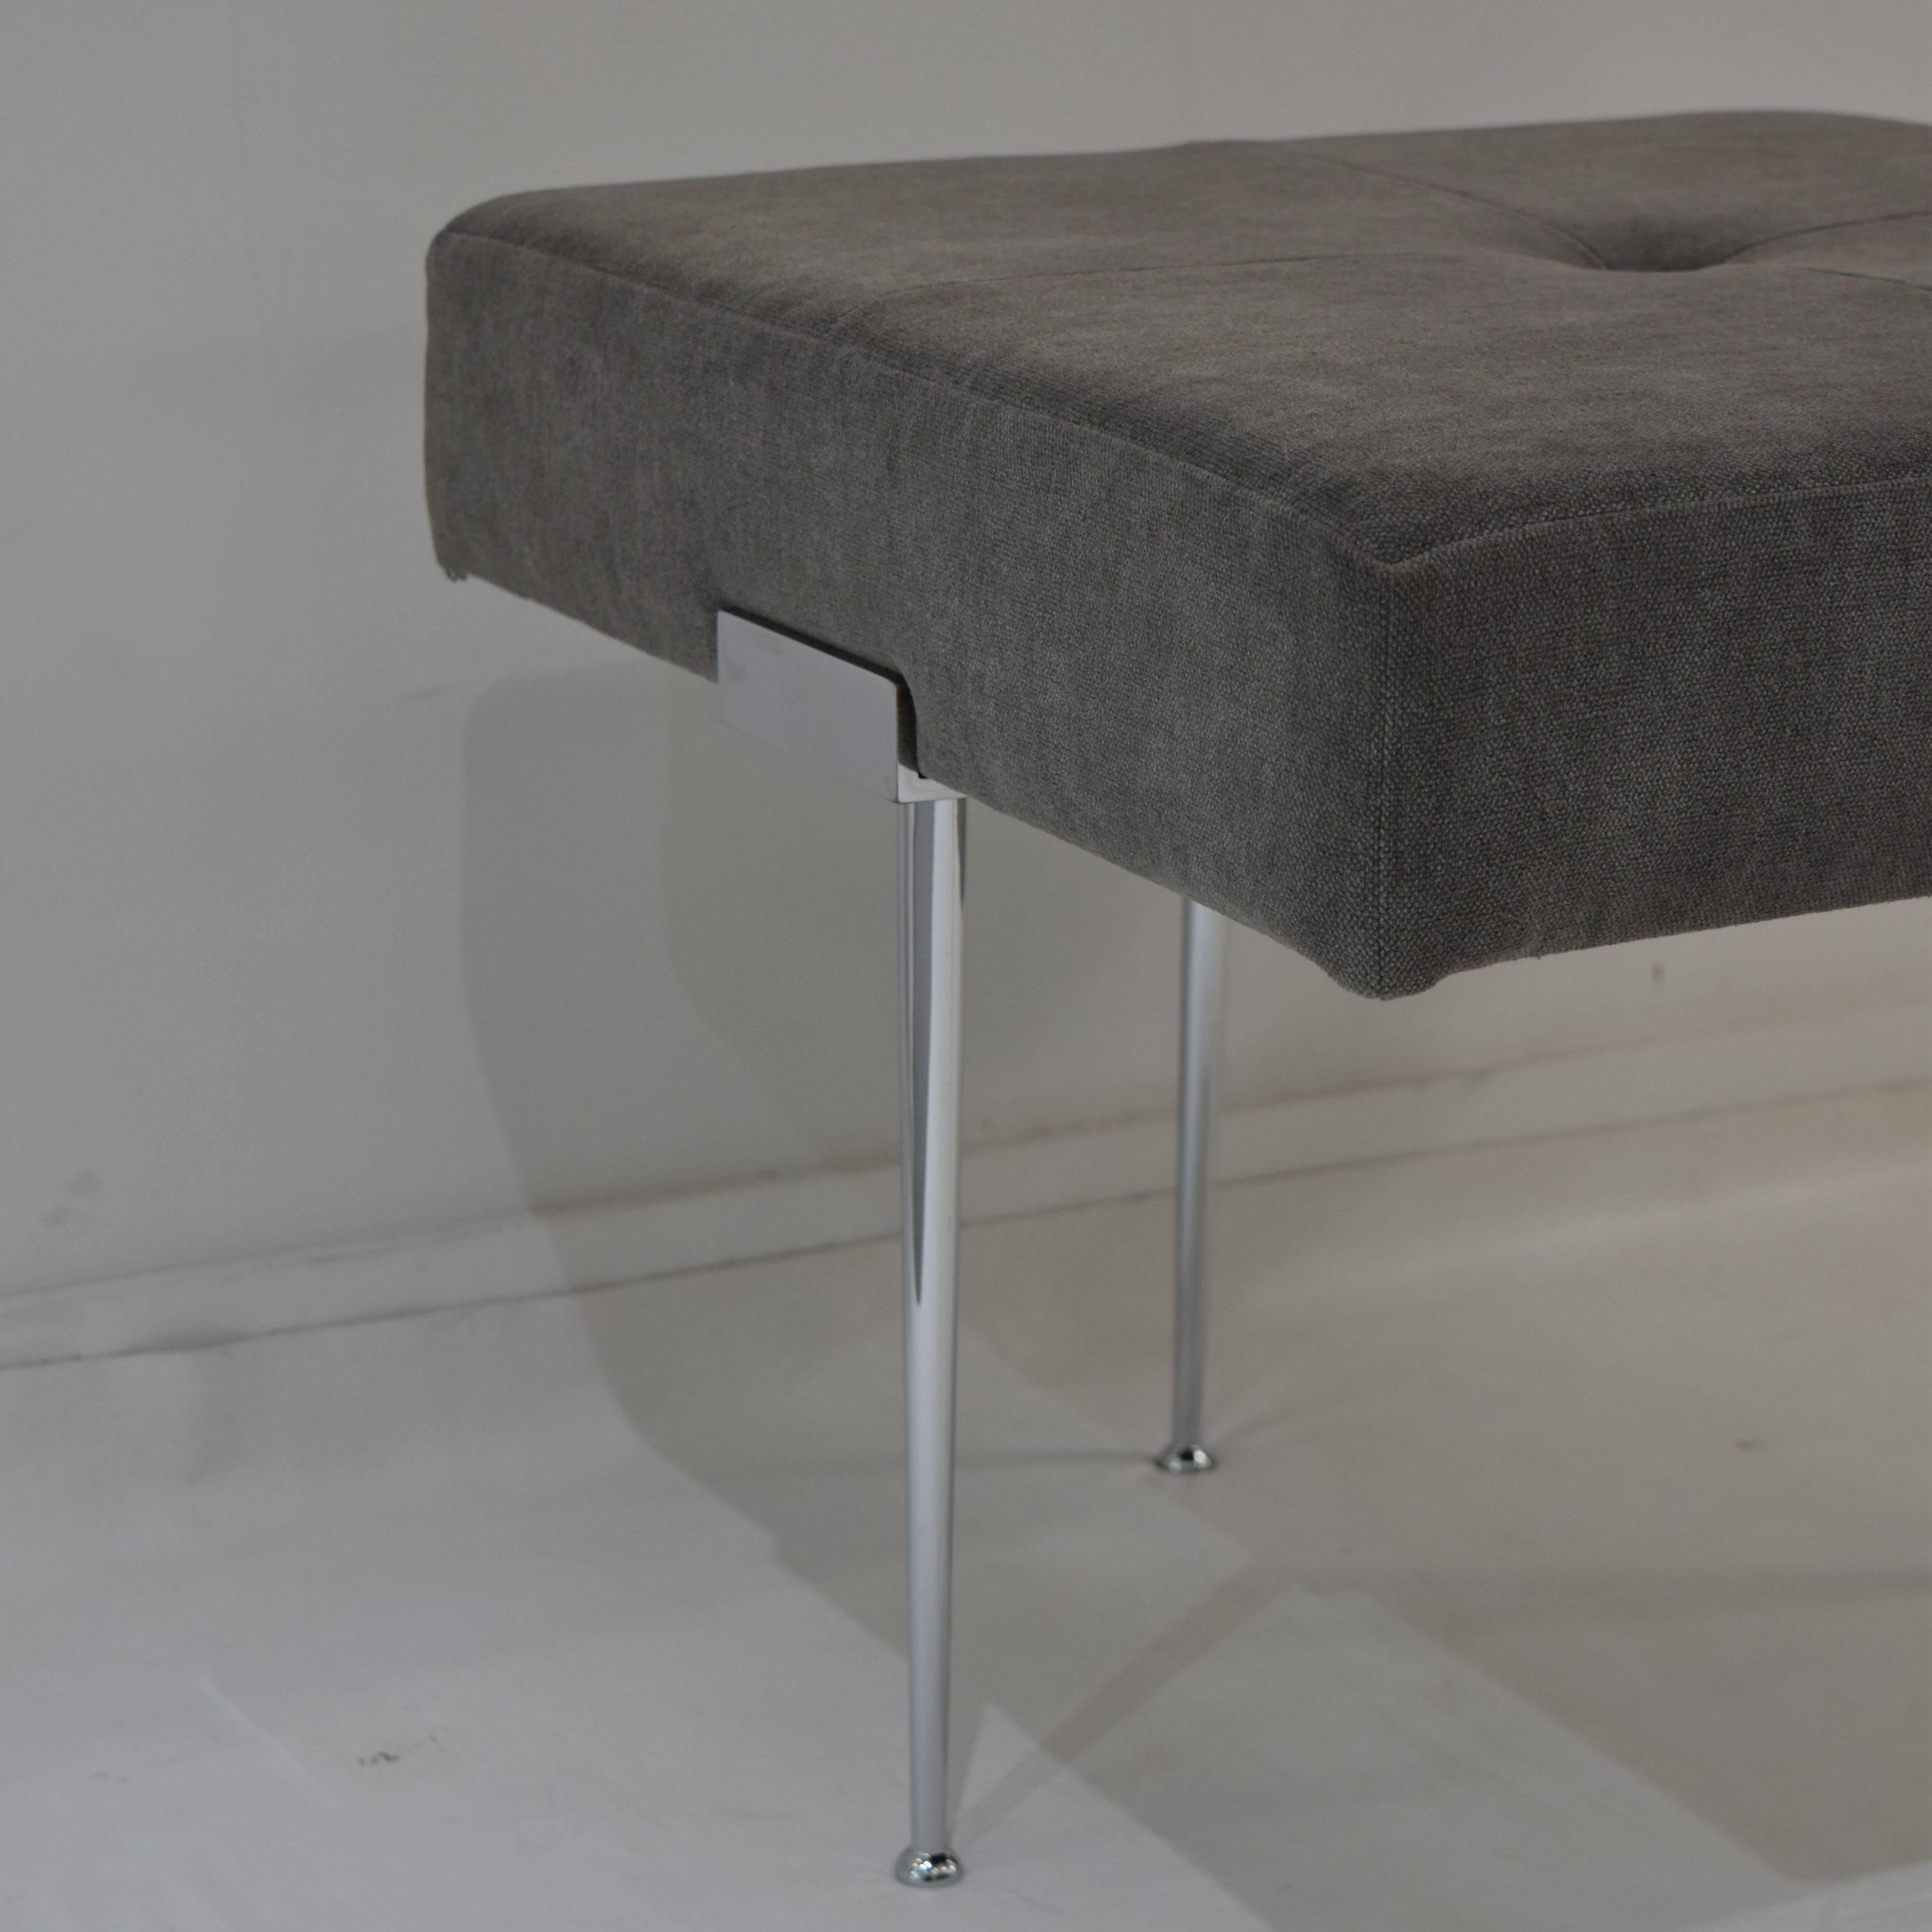 Our Madison square ottoman is designed by Irwin Feld Design for CF Modern and is covered in a tailored grey upholstery with four intersecting seams and button detail. The four hand cast and hand polished Madison legs are finished in chrome. Lead